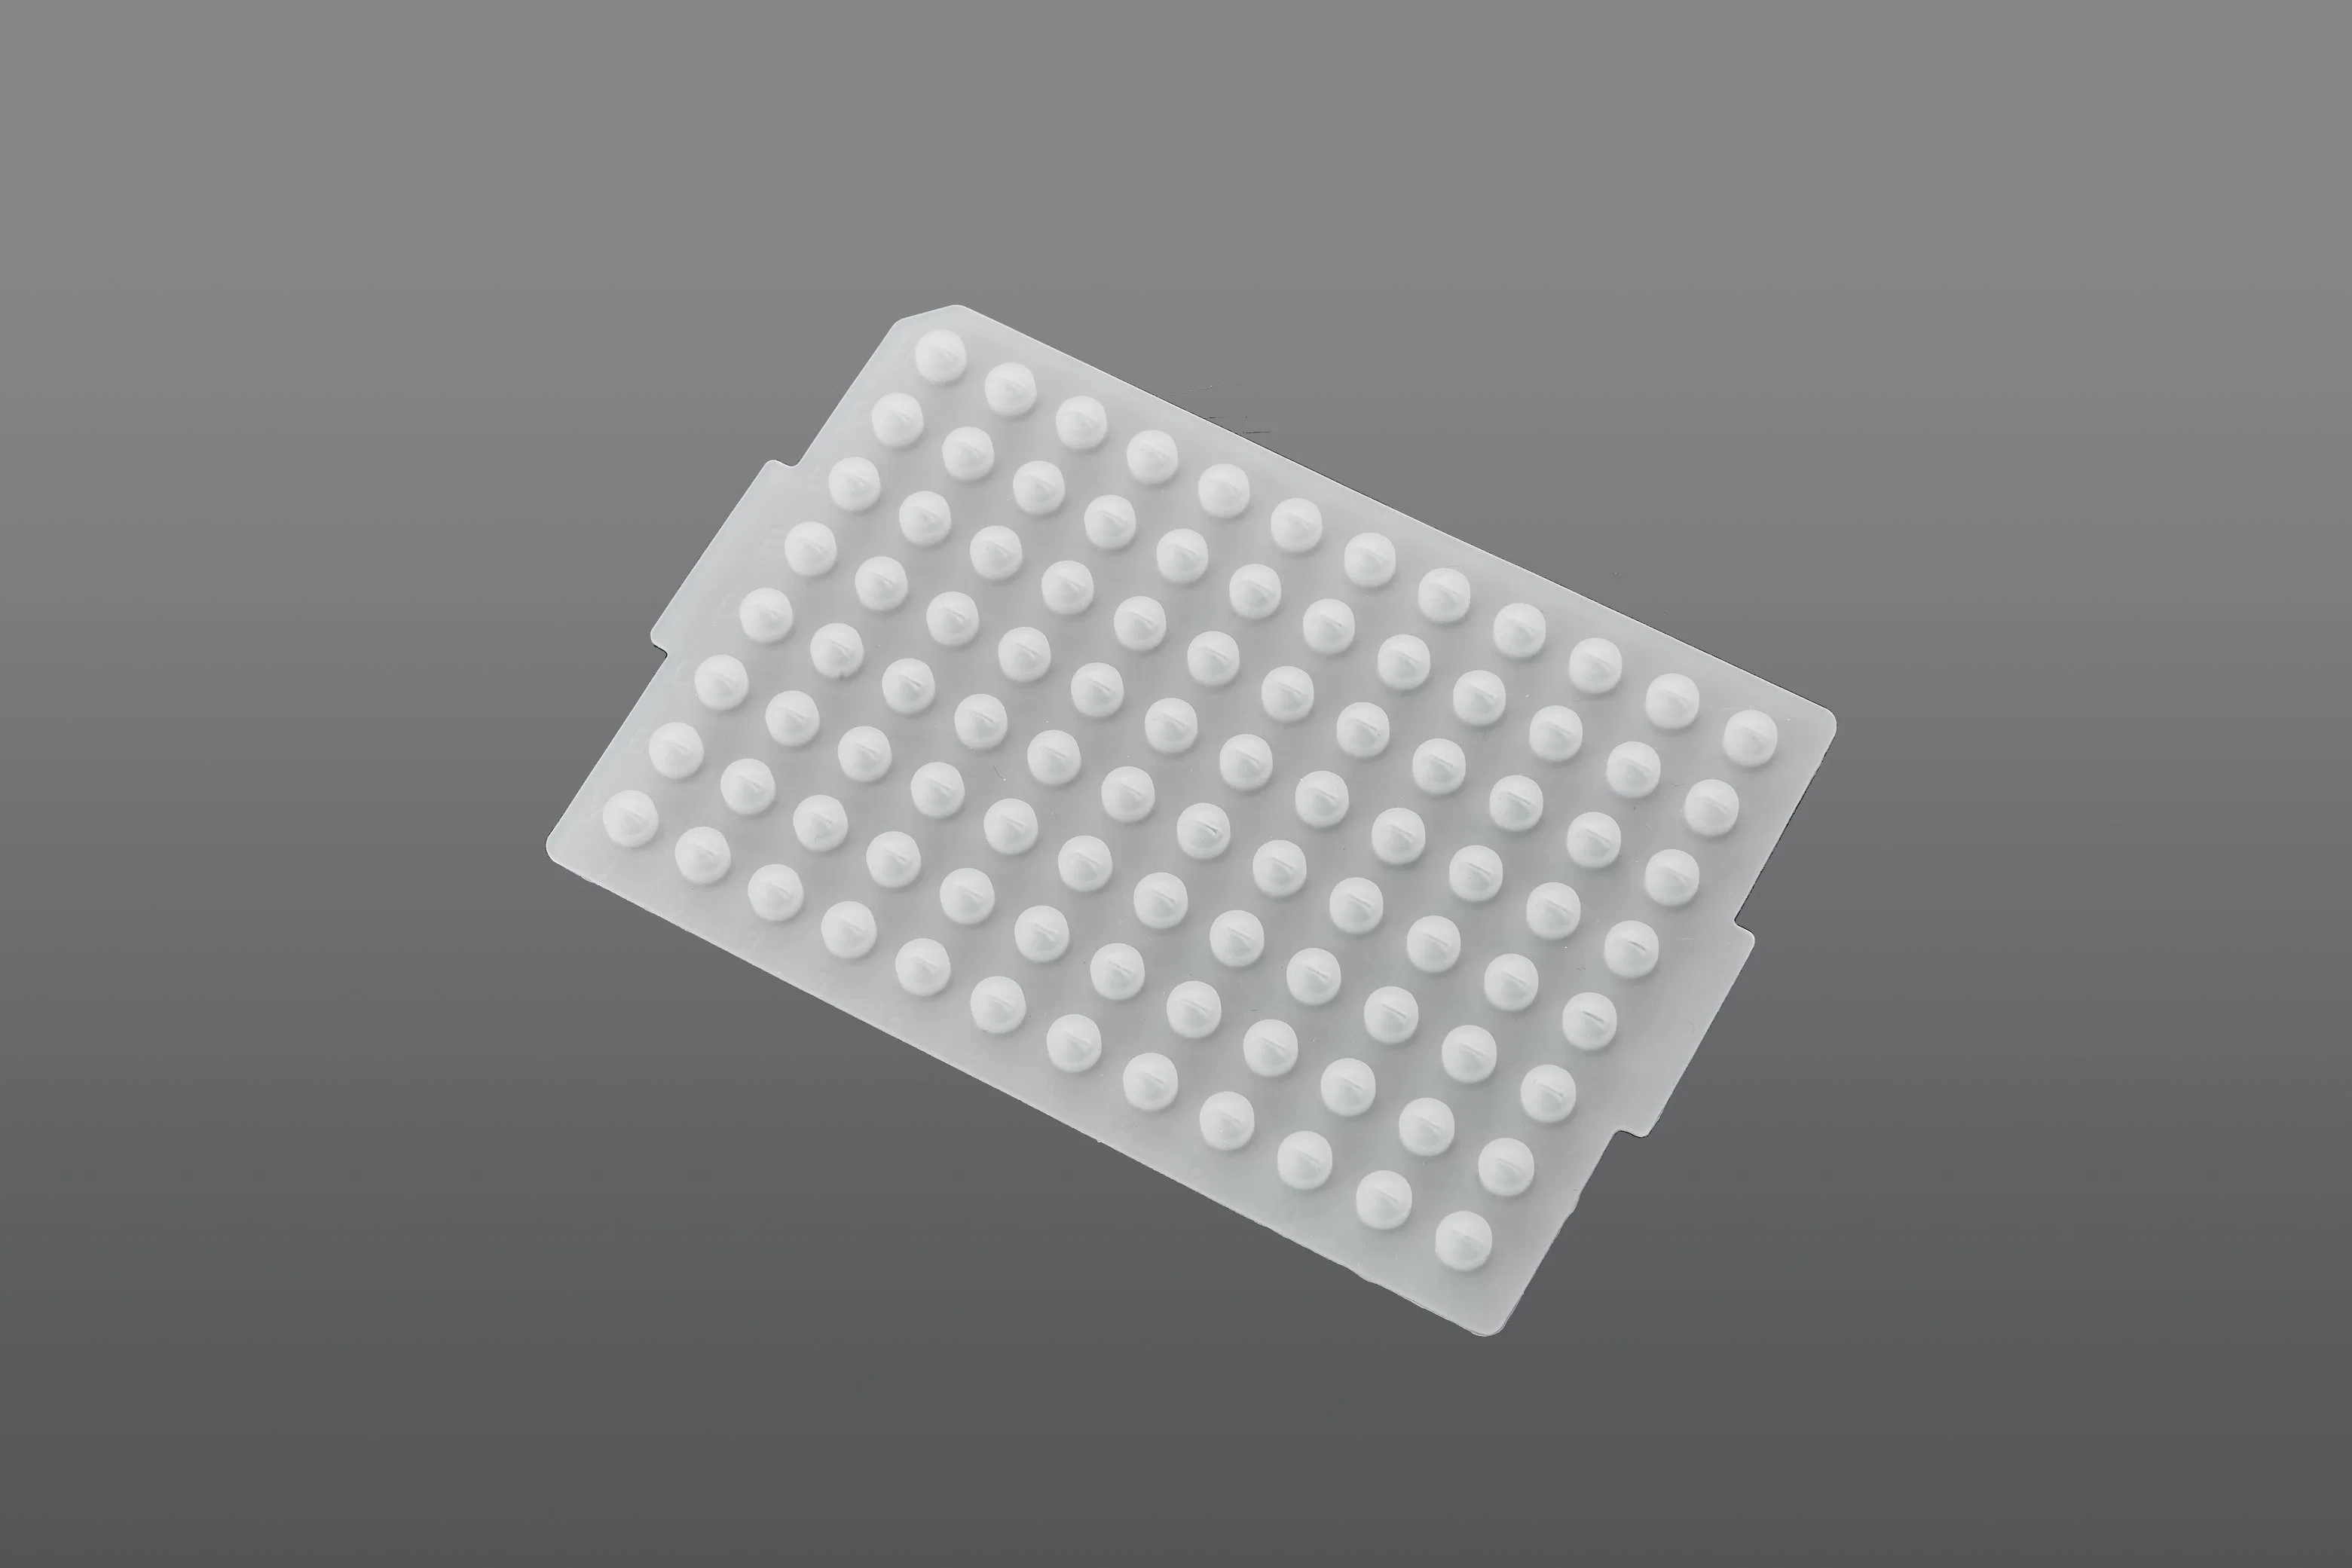 M-PCR-Rd-96 Lab Use Silicone Mat for 96 PCR Plate